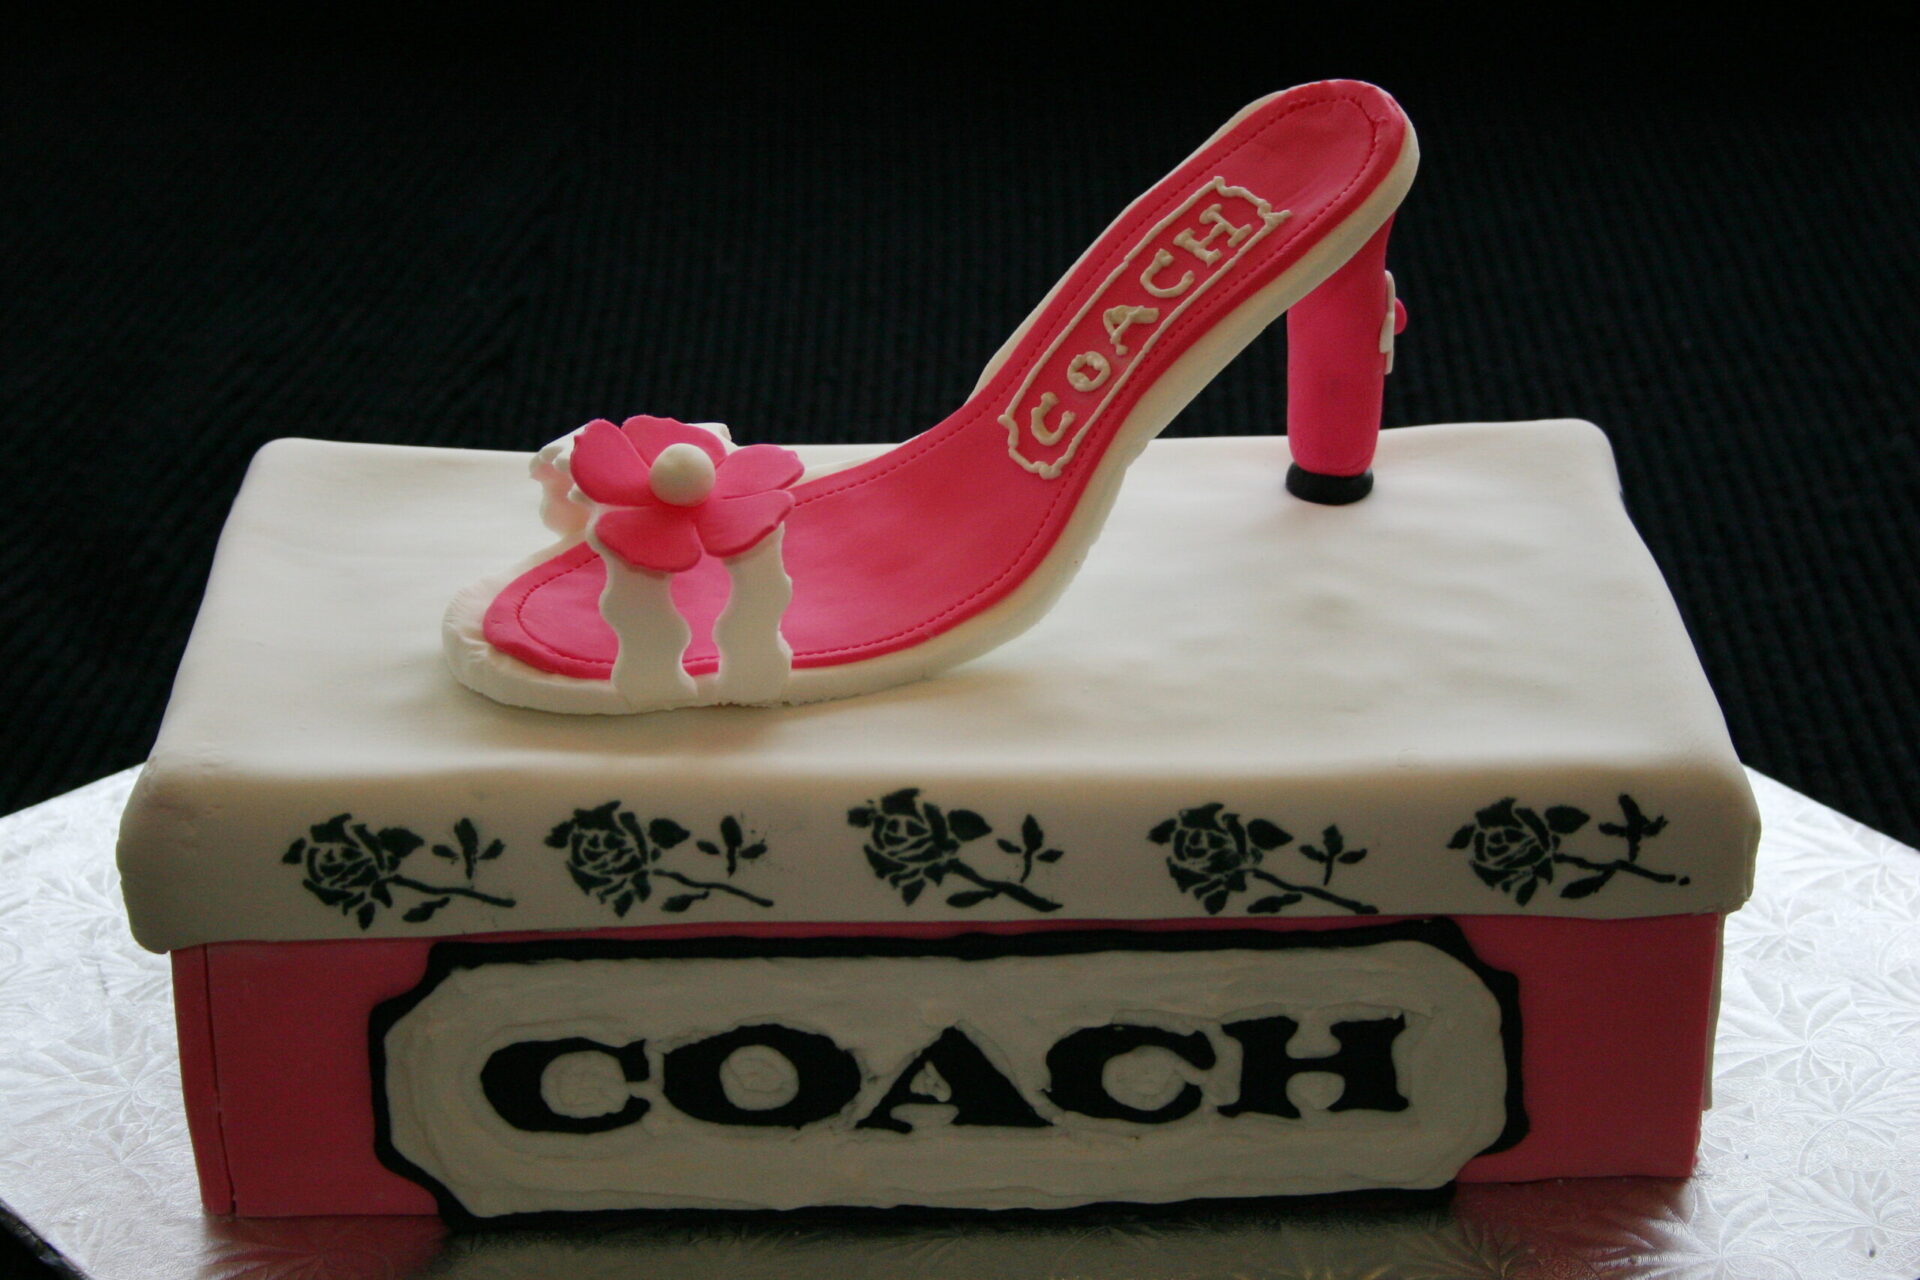 Designer Shoe Box Cake | Birthday cake ordered by a woman fo… | Flickr